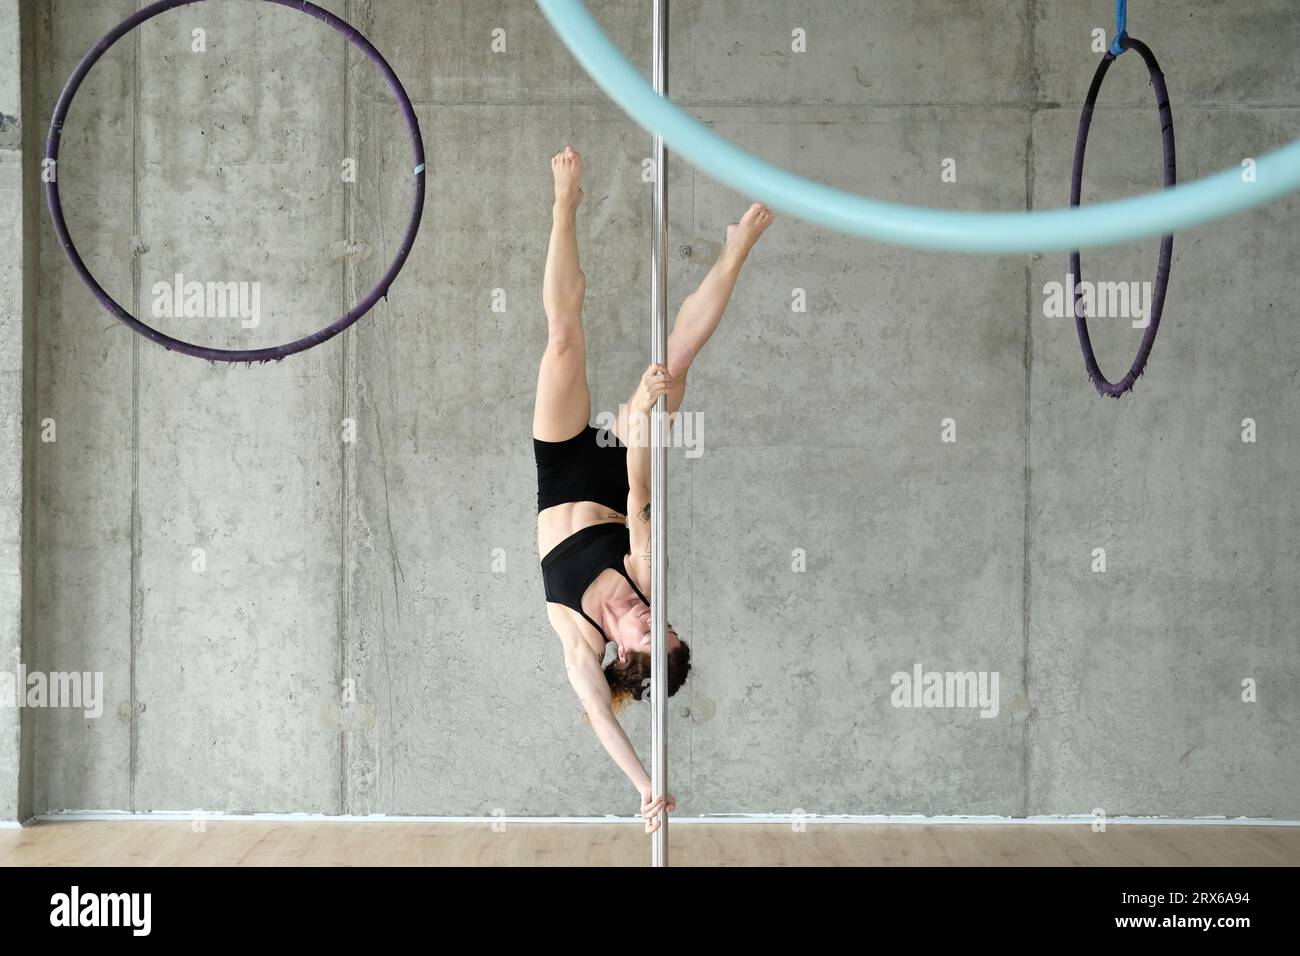 Woman practicing gymnastics on pole in front of concrete wall Stock Photo